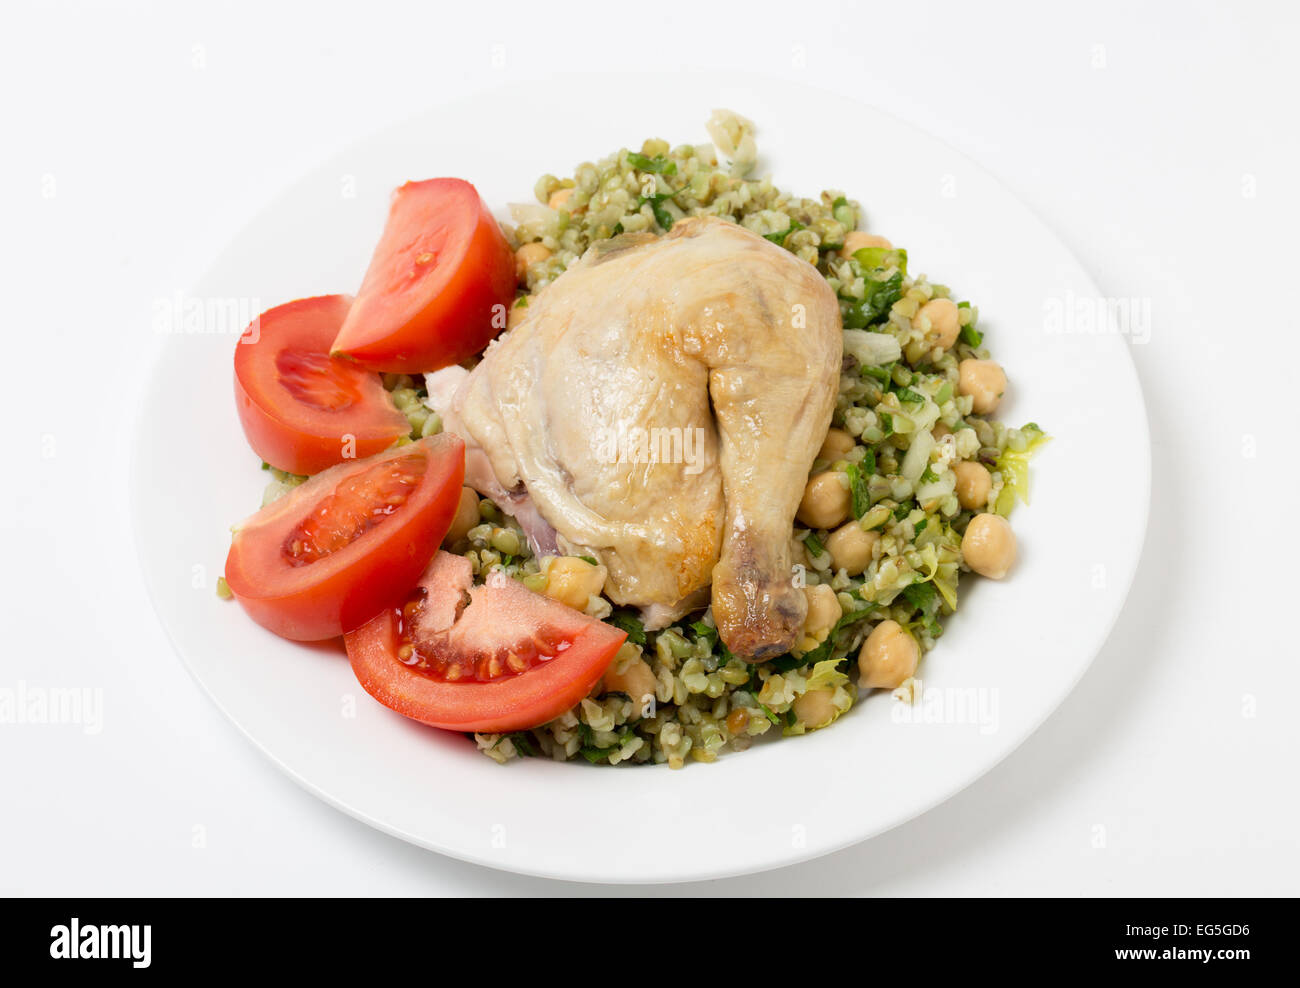 Freekeh salad with chickpeas, onion, parsley, celery, and a lemon juice and olive oil dressing, and a chicken leg with tomato Stock Photo